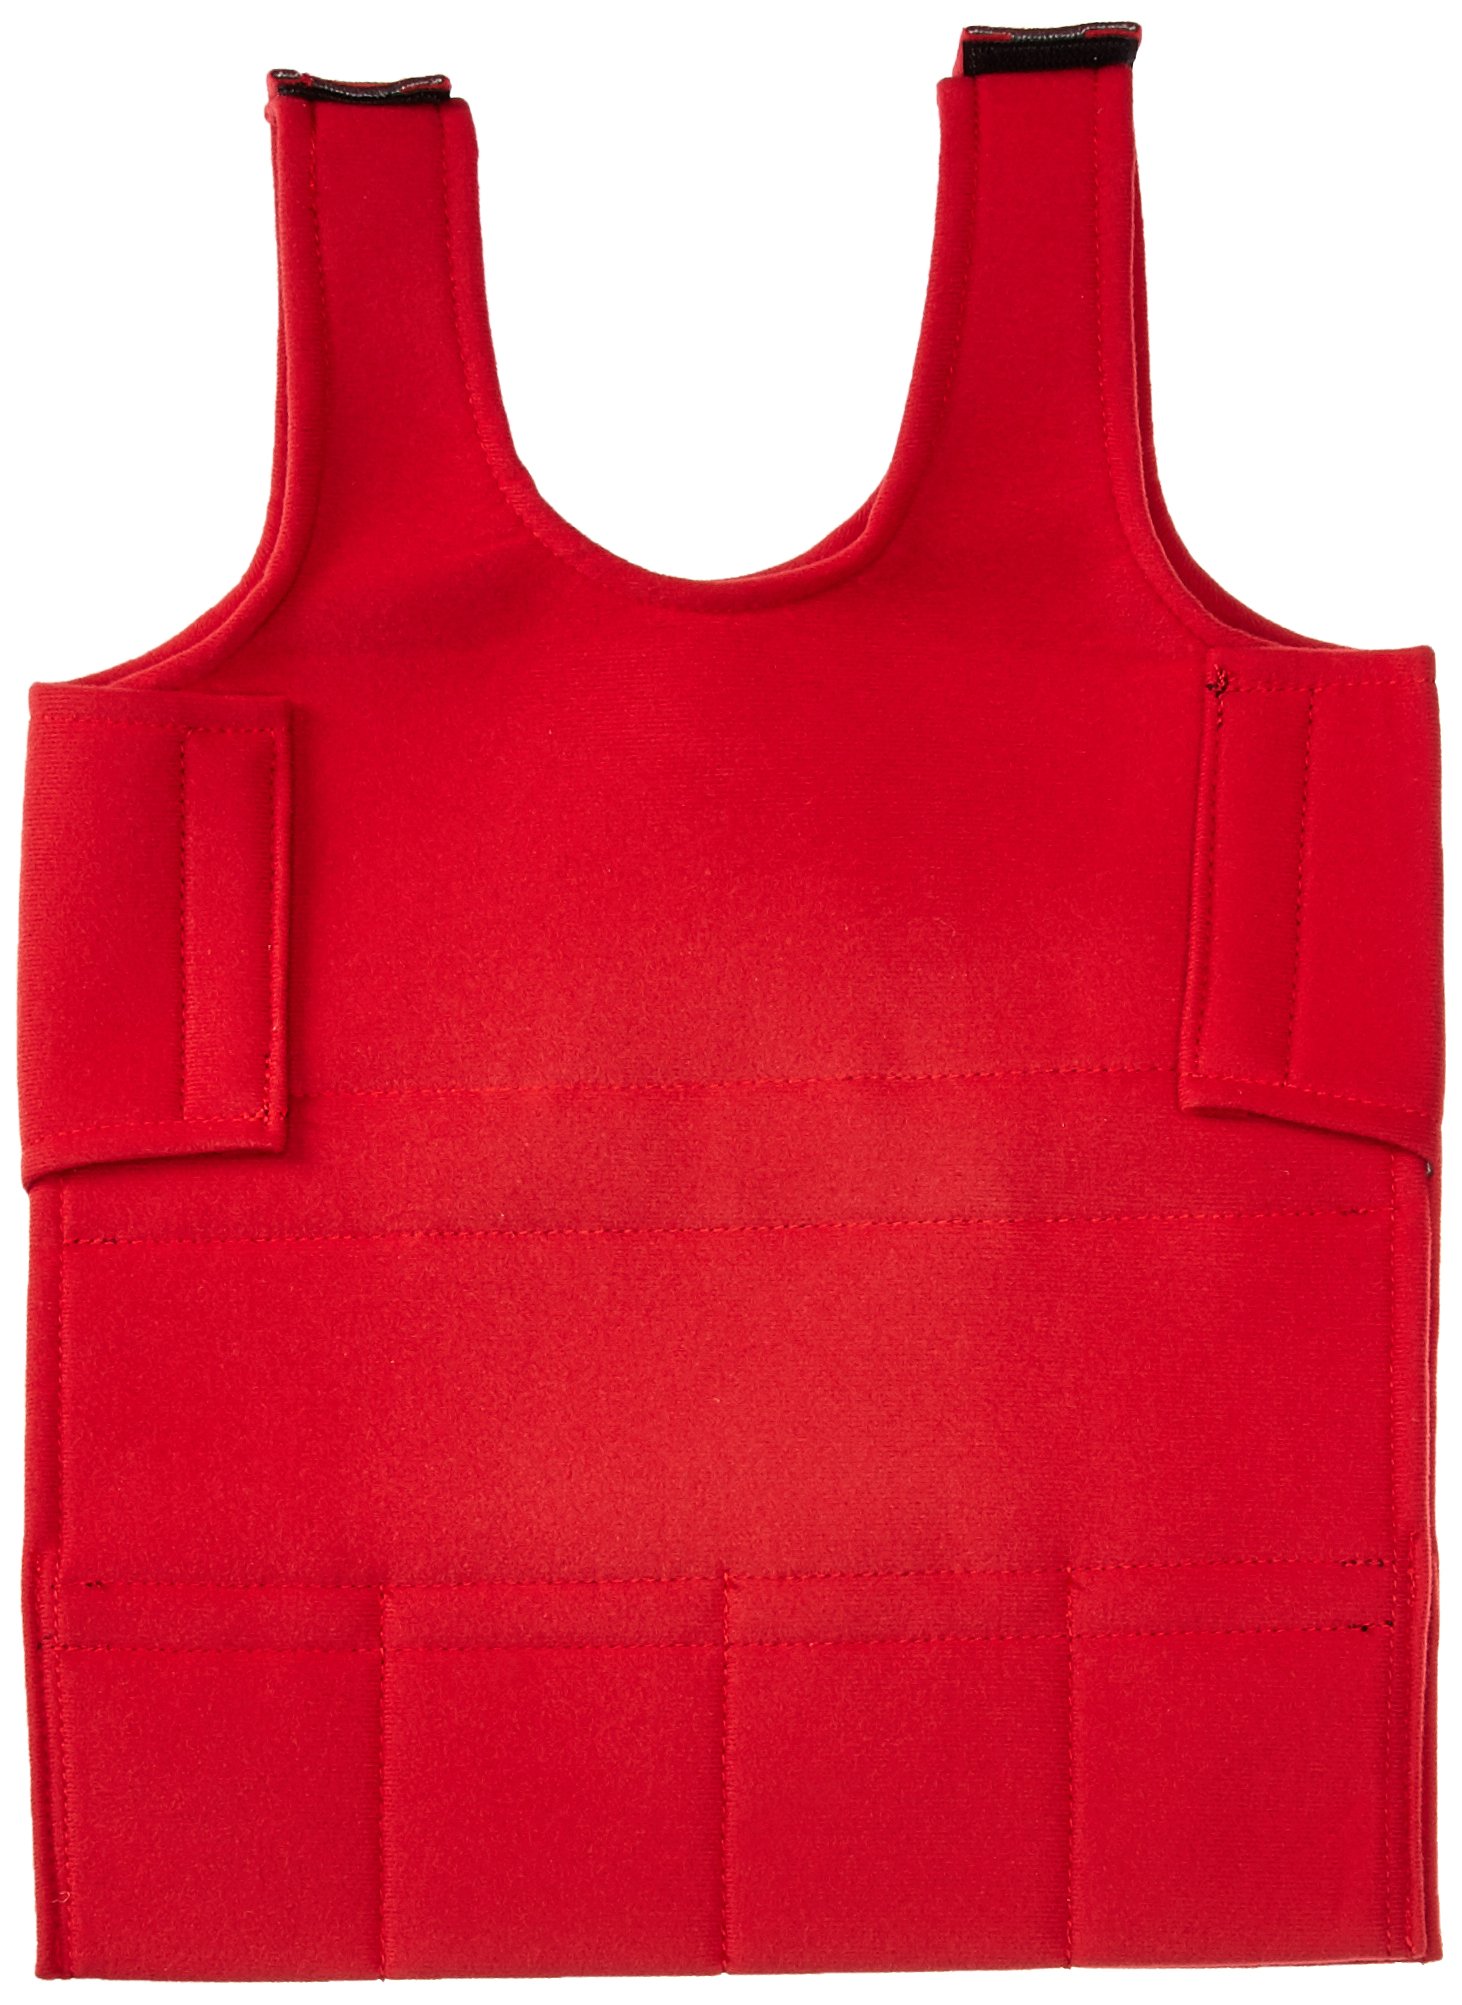 Abilitations Weighted 2 Pound Vest, 24 x 12 to 16 Inches, Red, X-Small